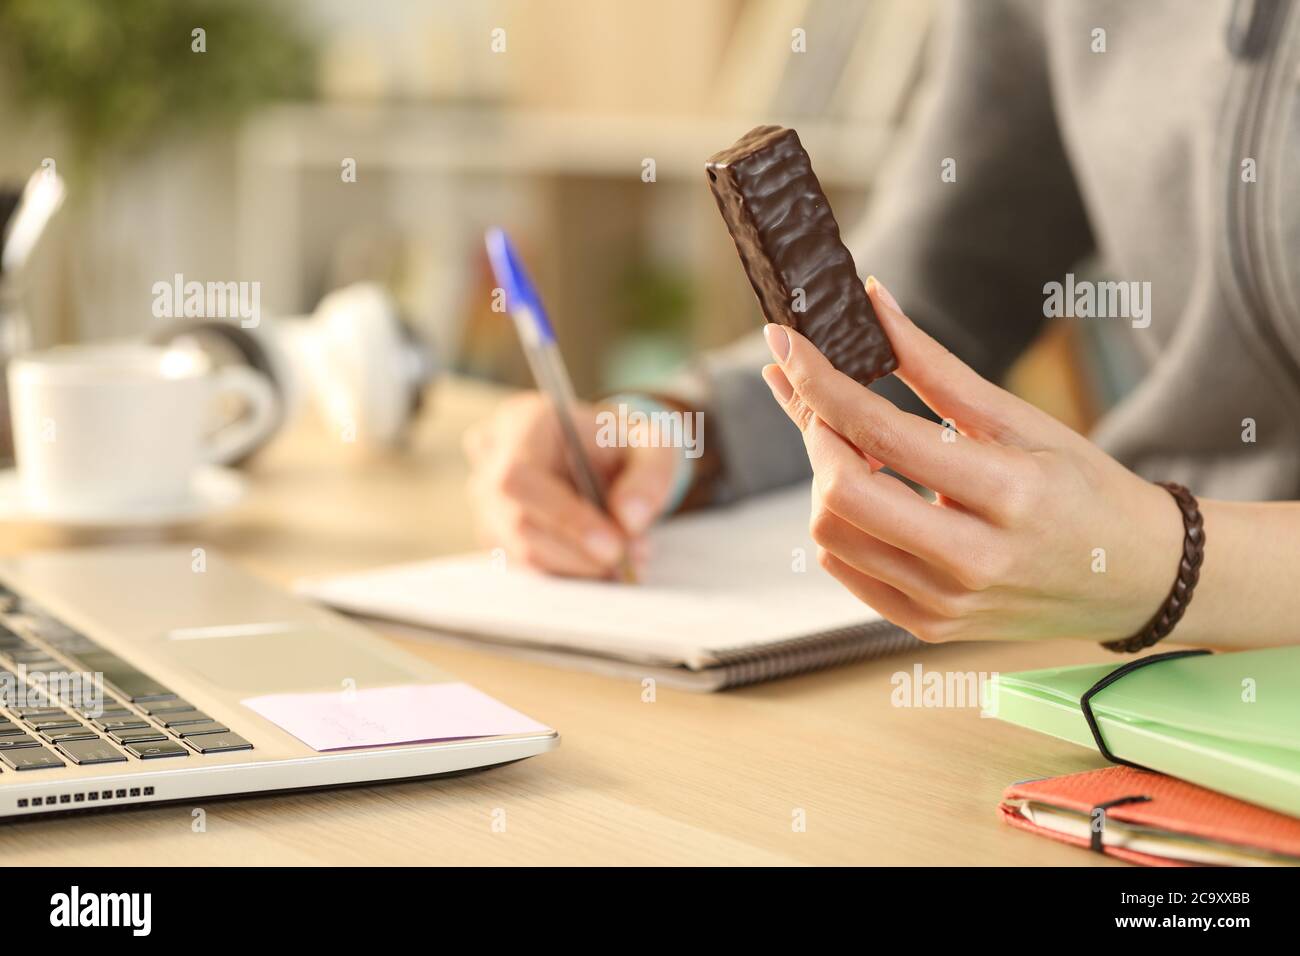 Close up of student girl hands holding chocolate snack bar studying at home Stock Photo